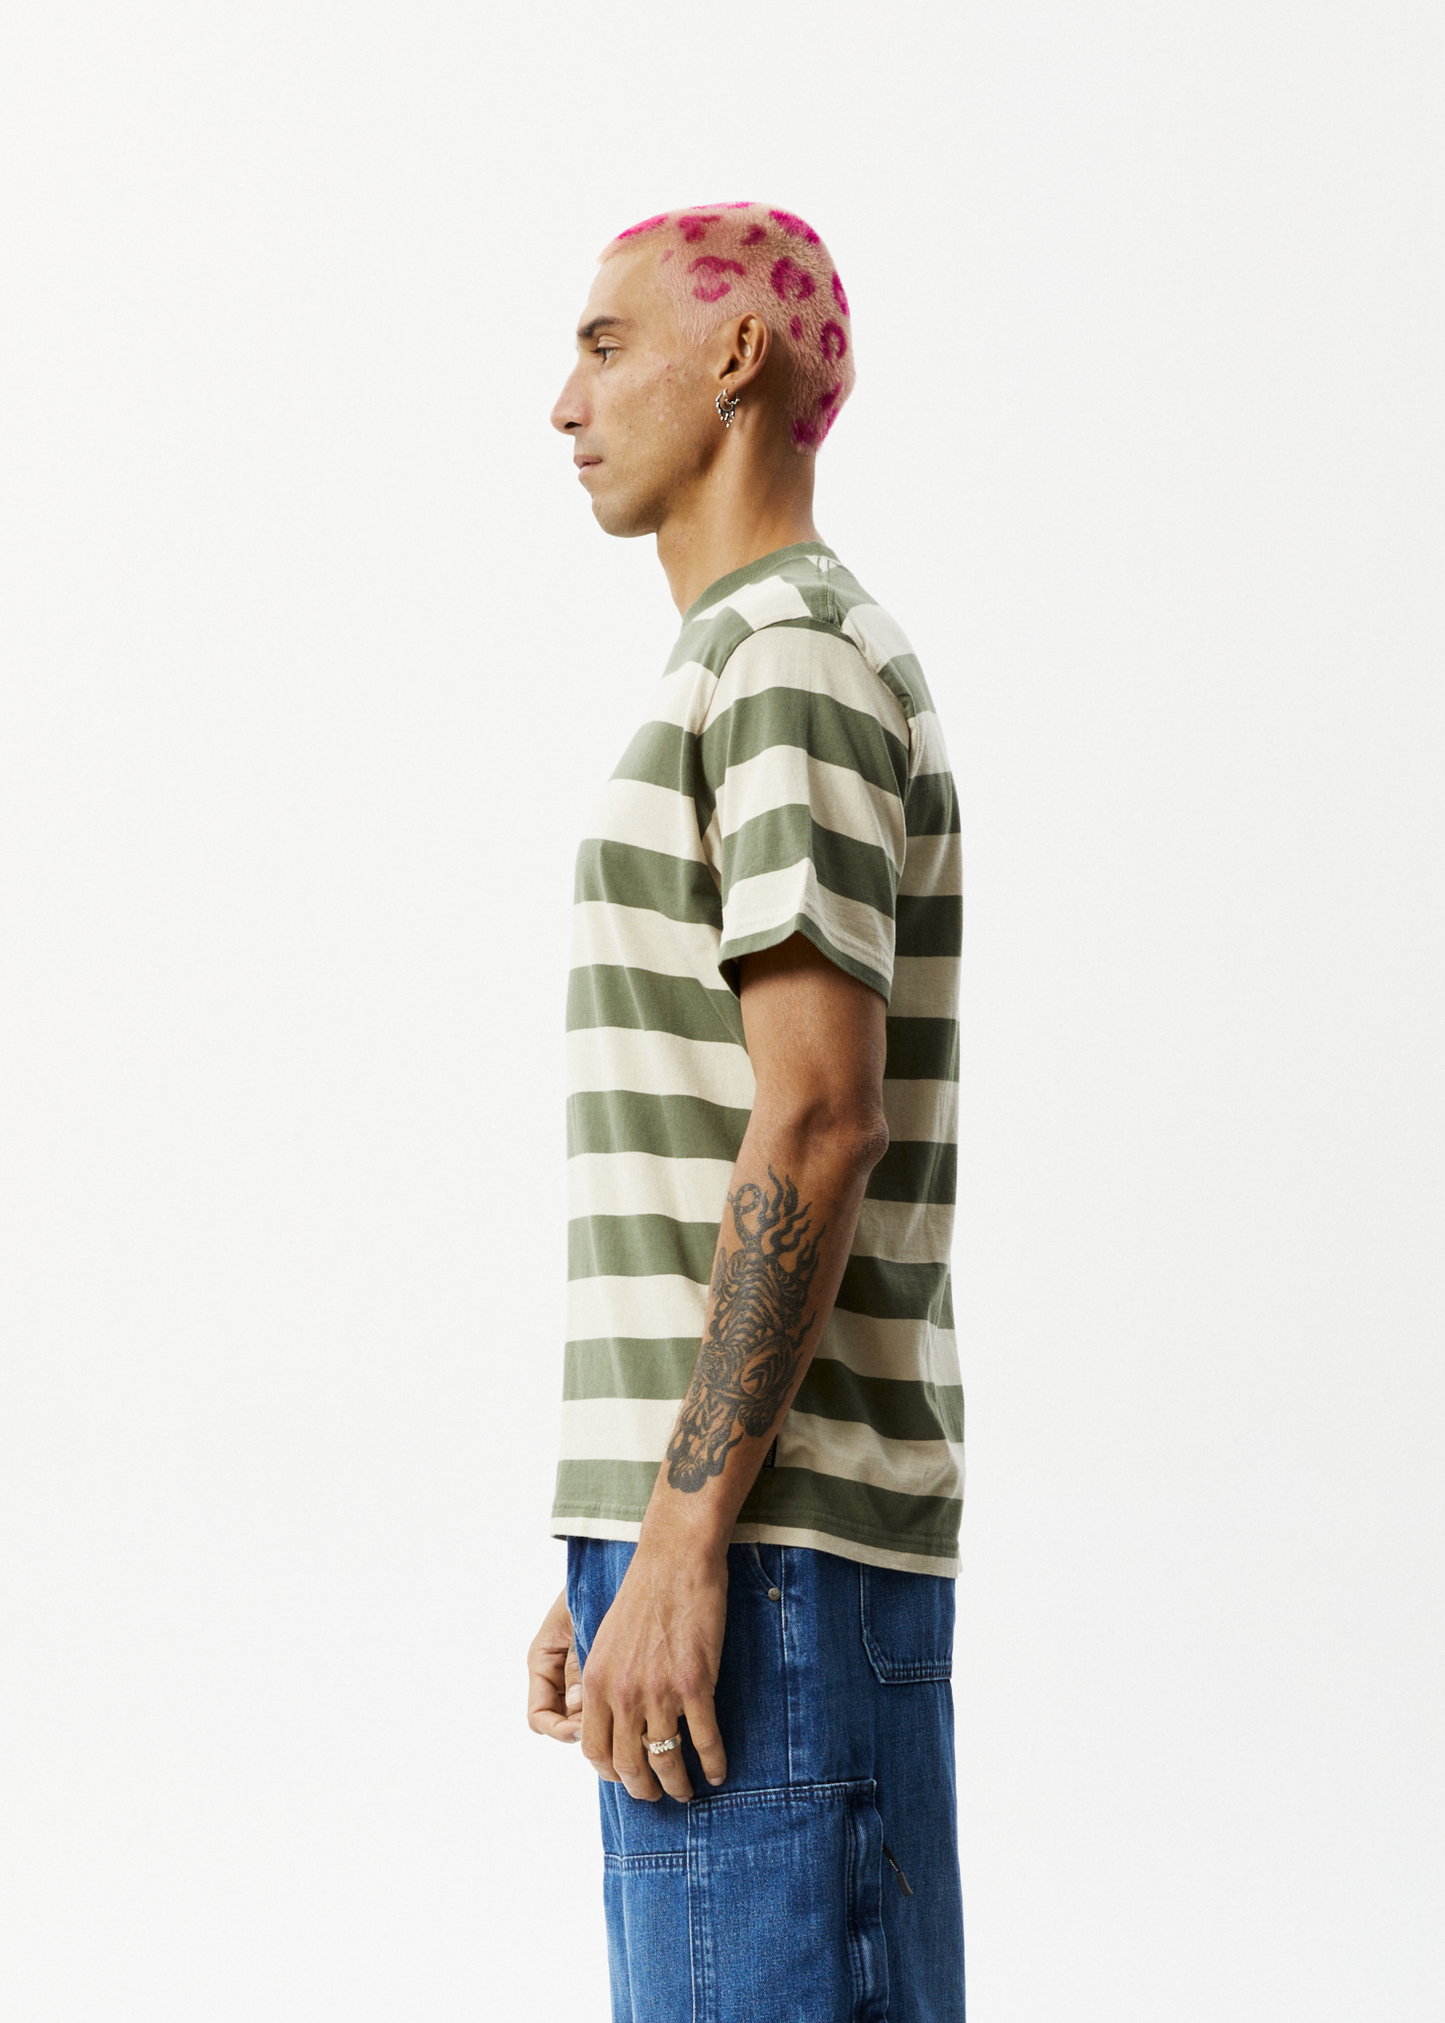 Afends Mens Needle - Recycled Retro Logo T-Shirt - Cypress Stripe 